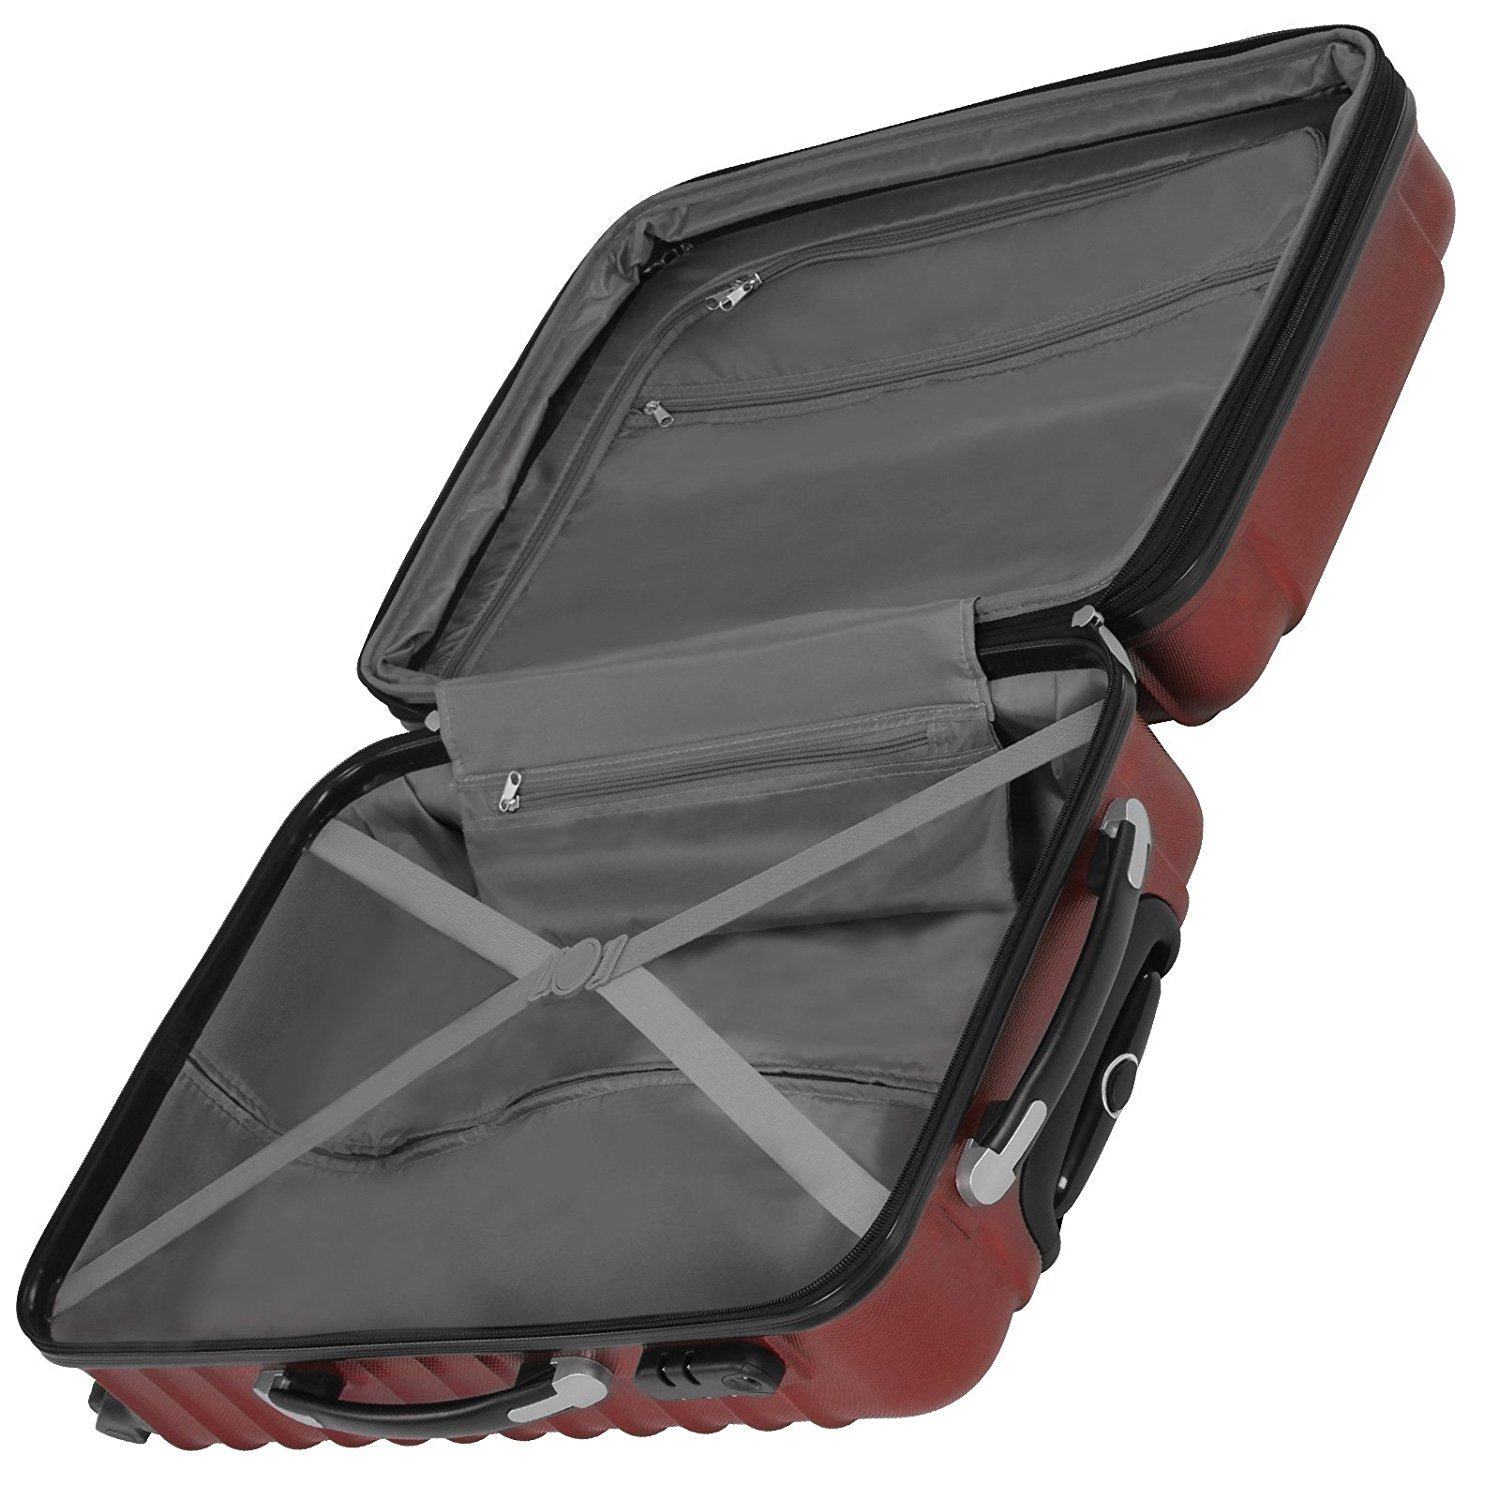 Vojagor Hard Shell Trolley Suitcases Internal